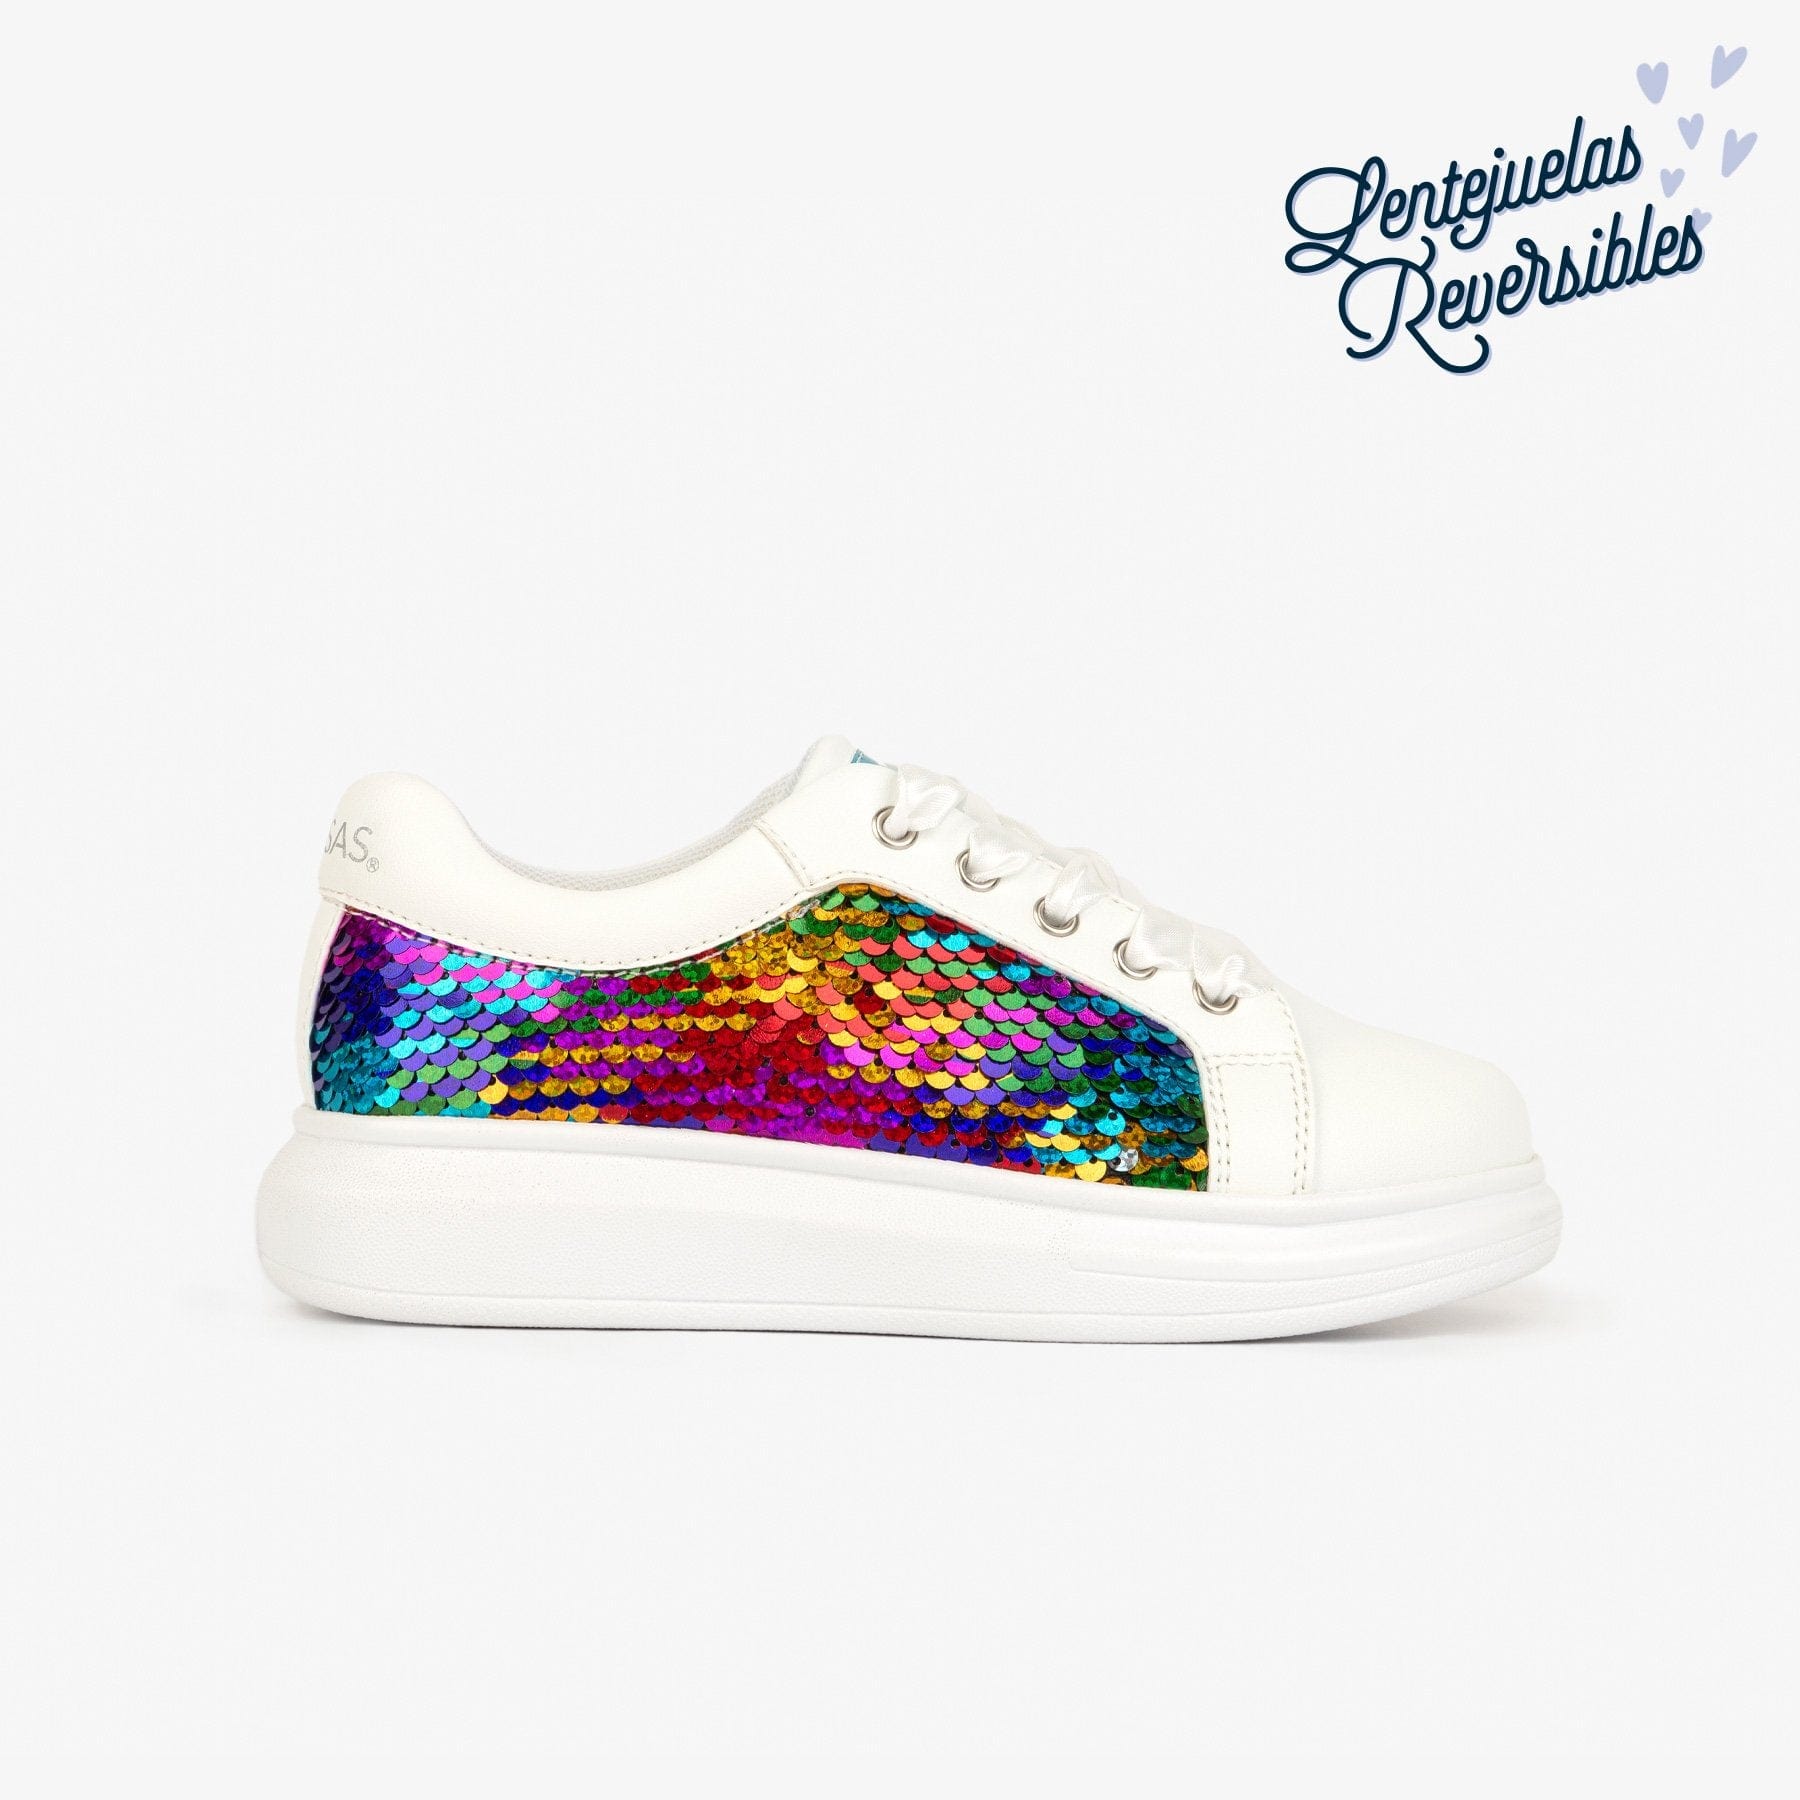 FRESAS CON NATA Shoes Girl's Multi Sequins Sneakers